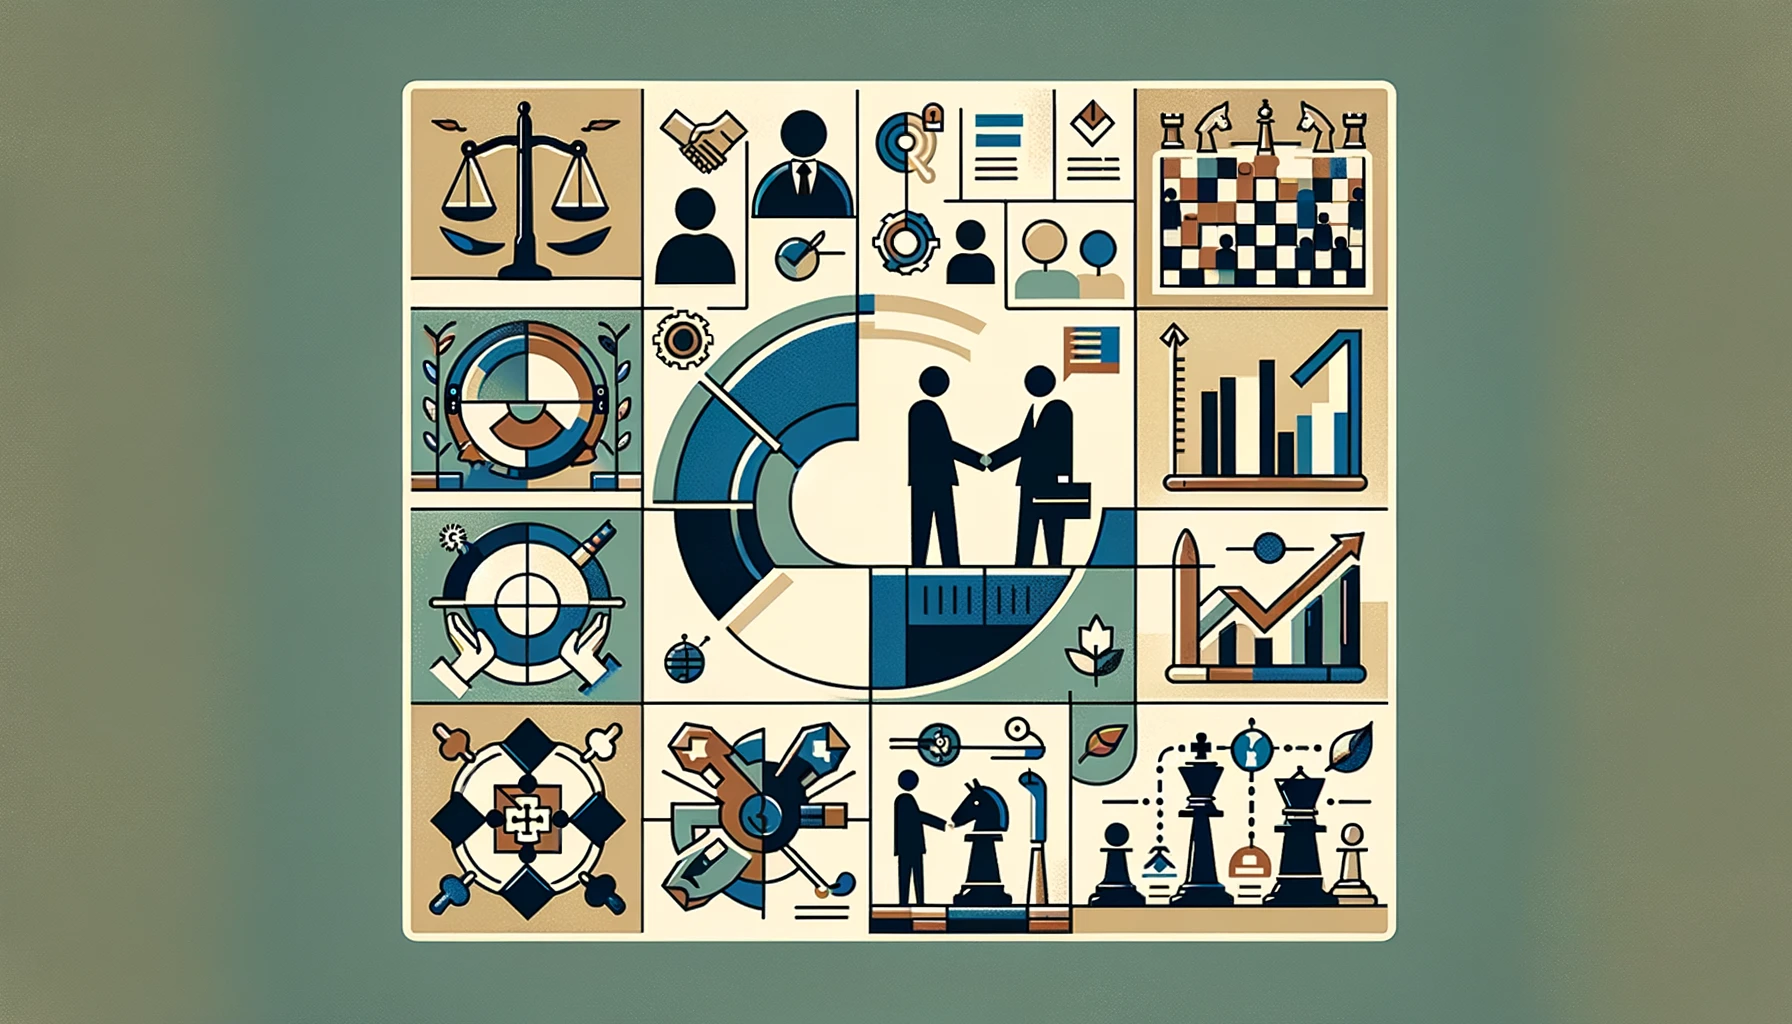 A wide, simple image depicting Engaging in Continuous Learning and Improvement: a balance scale for win-win, handshake for agreement, chessboard for strategy, and bridge for bridging differences, each in distinct sections.